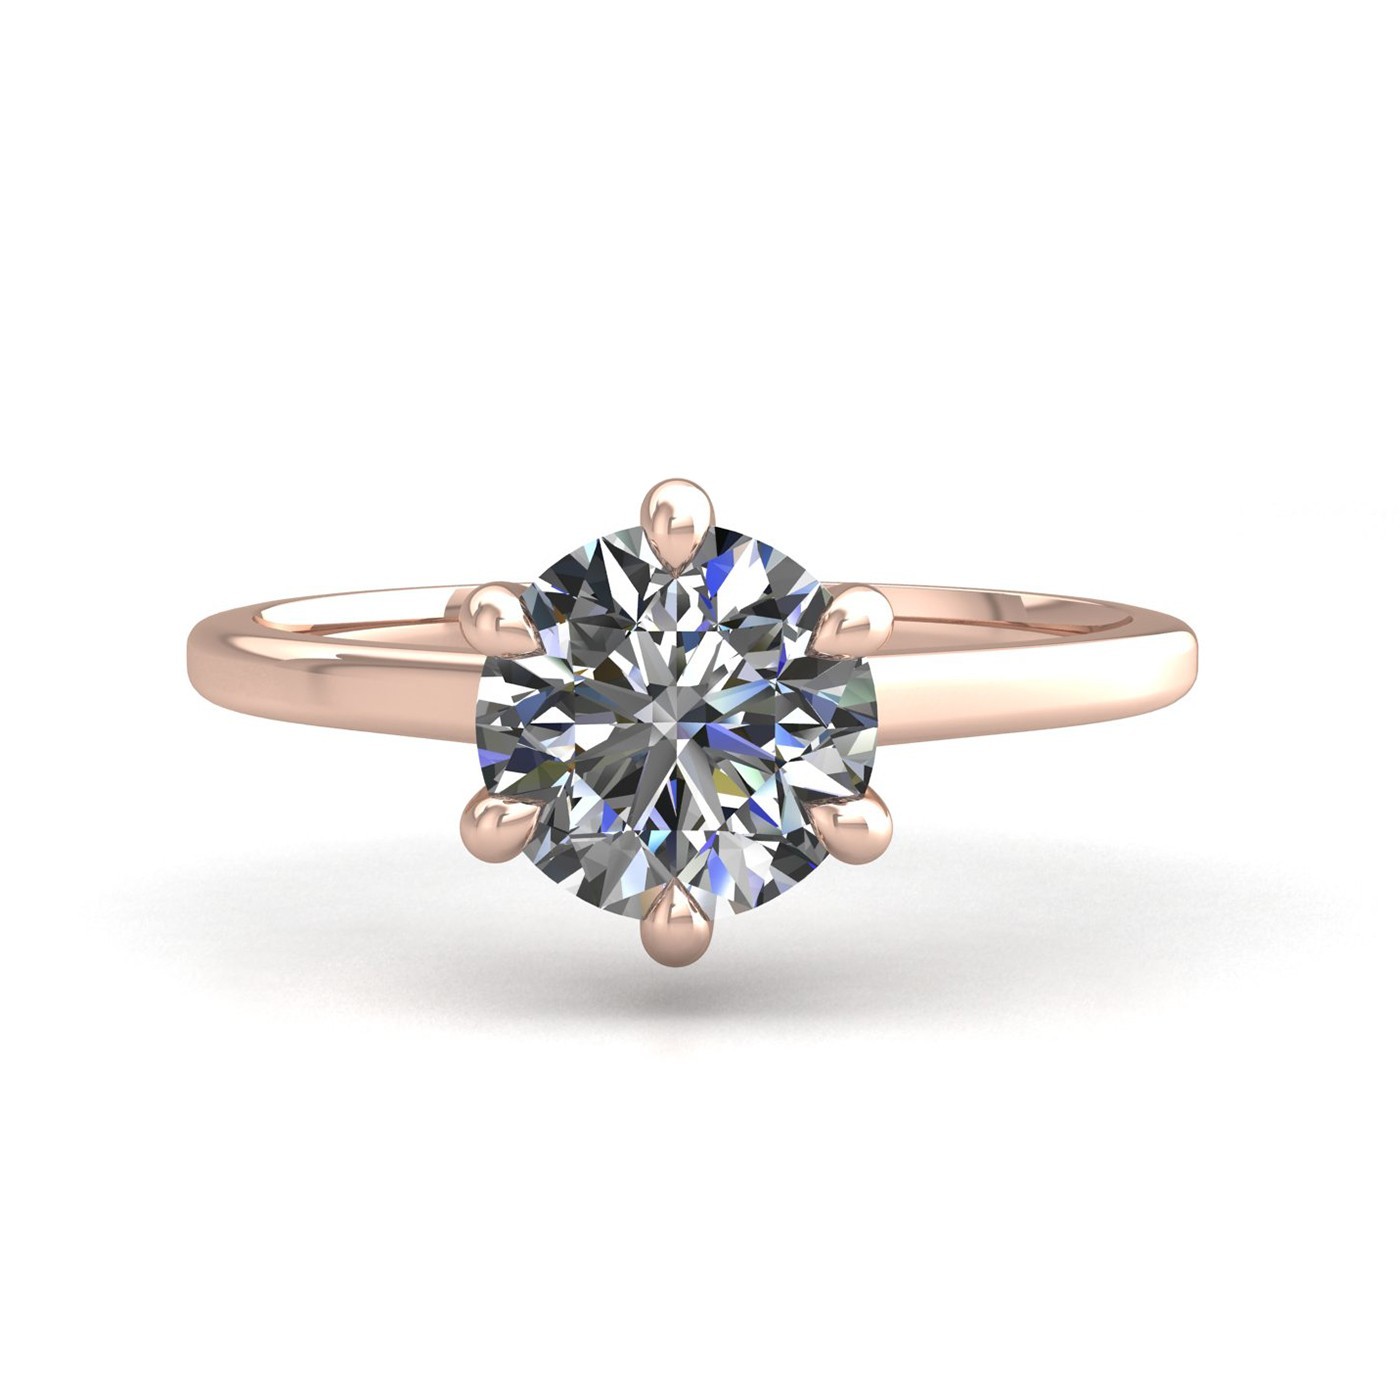 18k rose gold 0,50 ct 6 prongs solitaire round cut diamond engagement ring with whisper thin band Photos & images